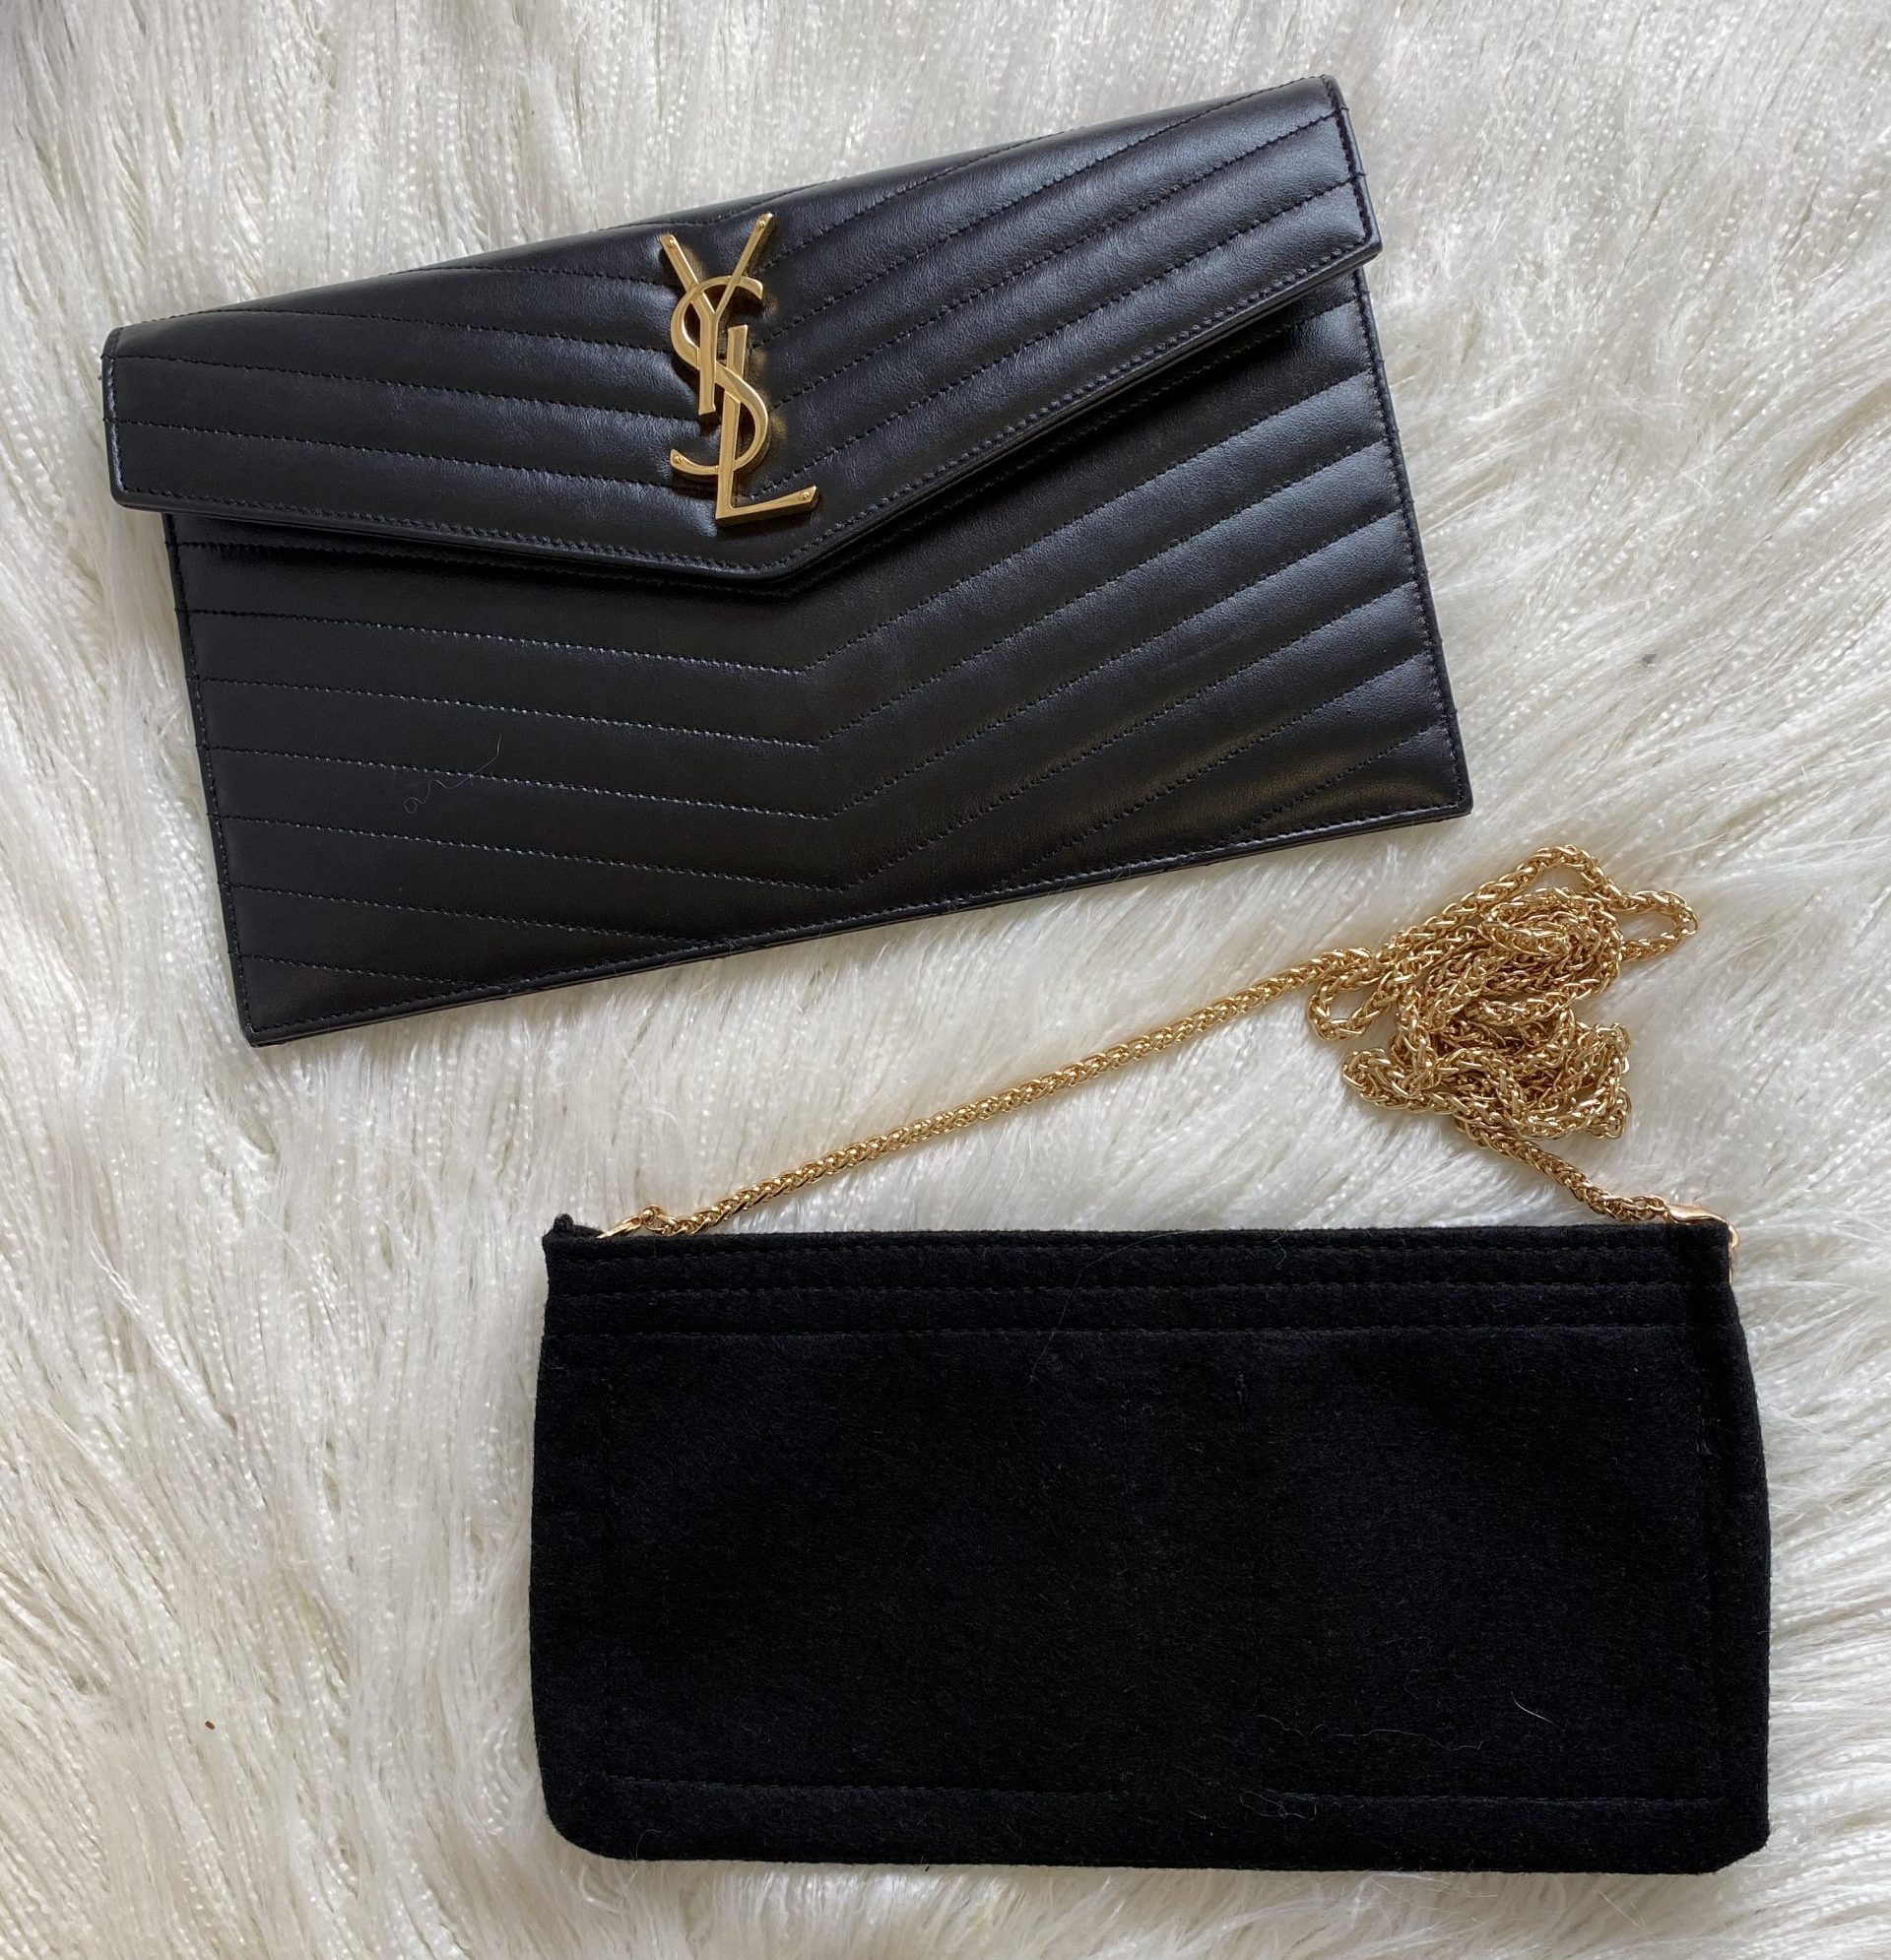 lv wallet insert with chain